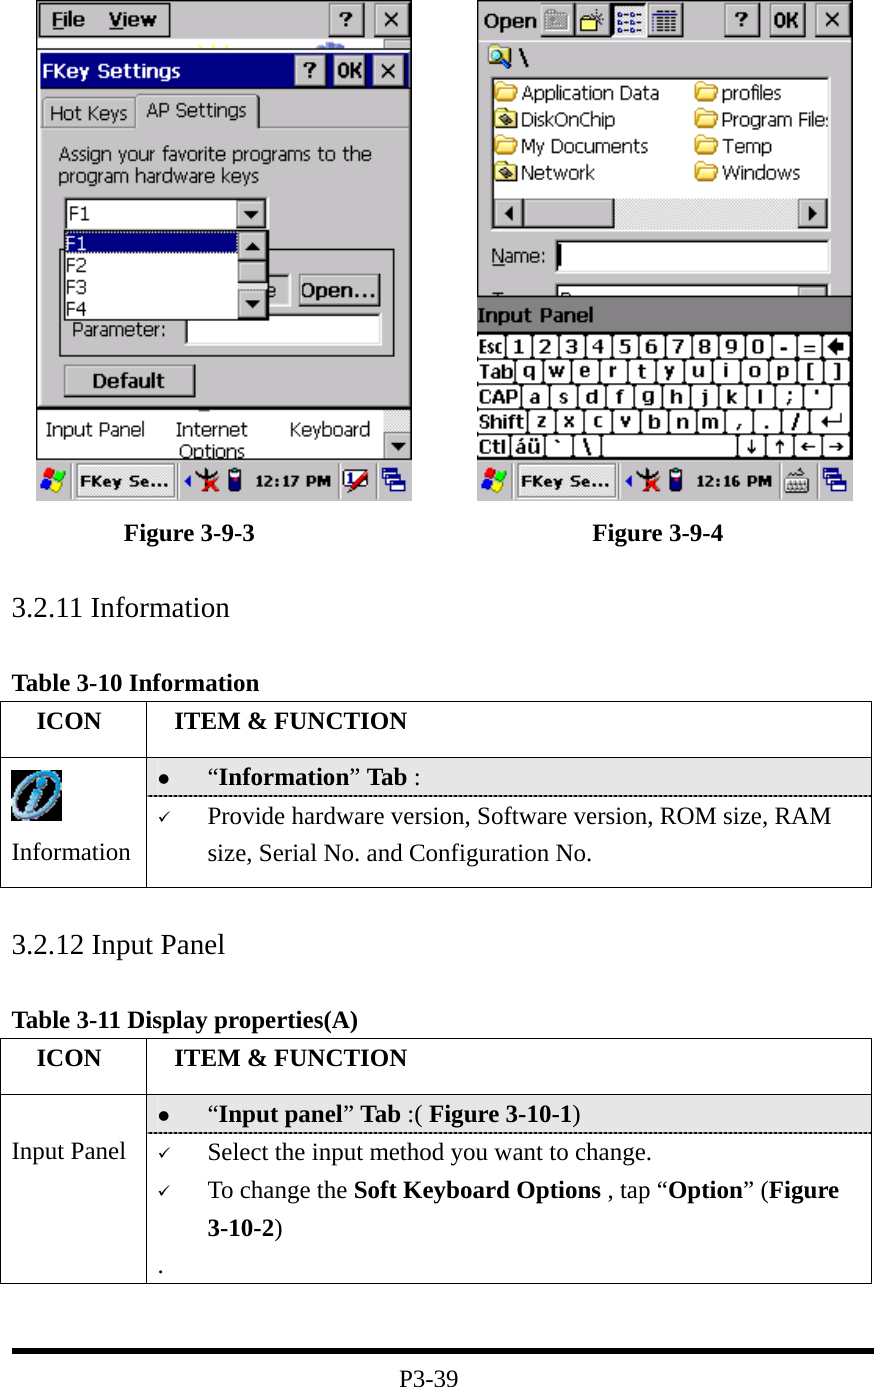                 Figure 3-9-3                           Figure 3-9-4   3.2.11 Information  Table 3-10 Information   ICON   ITEM &amp; FUNCTION   “Information” Tab :    Information   Provide hardware version, Software version, ROM size, RAM size, Serial No. and Configuration No.  3.2.12 Input Panel  Table 3-11 Display properties(A)   ICON   ITEM &amp; FUNCTION   “Input panel” Tab :( Figure 3-10-1)    Input Panel    Select the input method you want to change.   To change the Soft Keyboard Options , tap “Option” (Figure 3-10-2) .   P3-39 